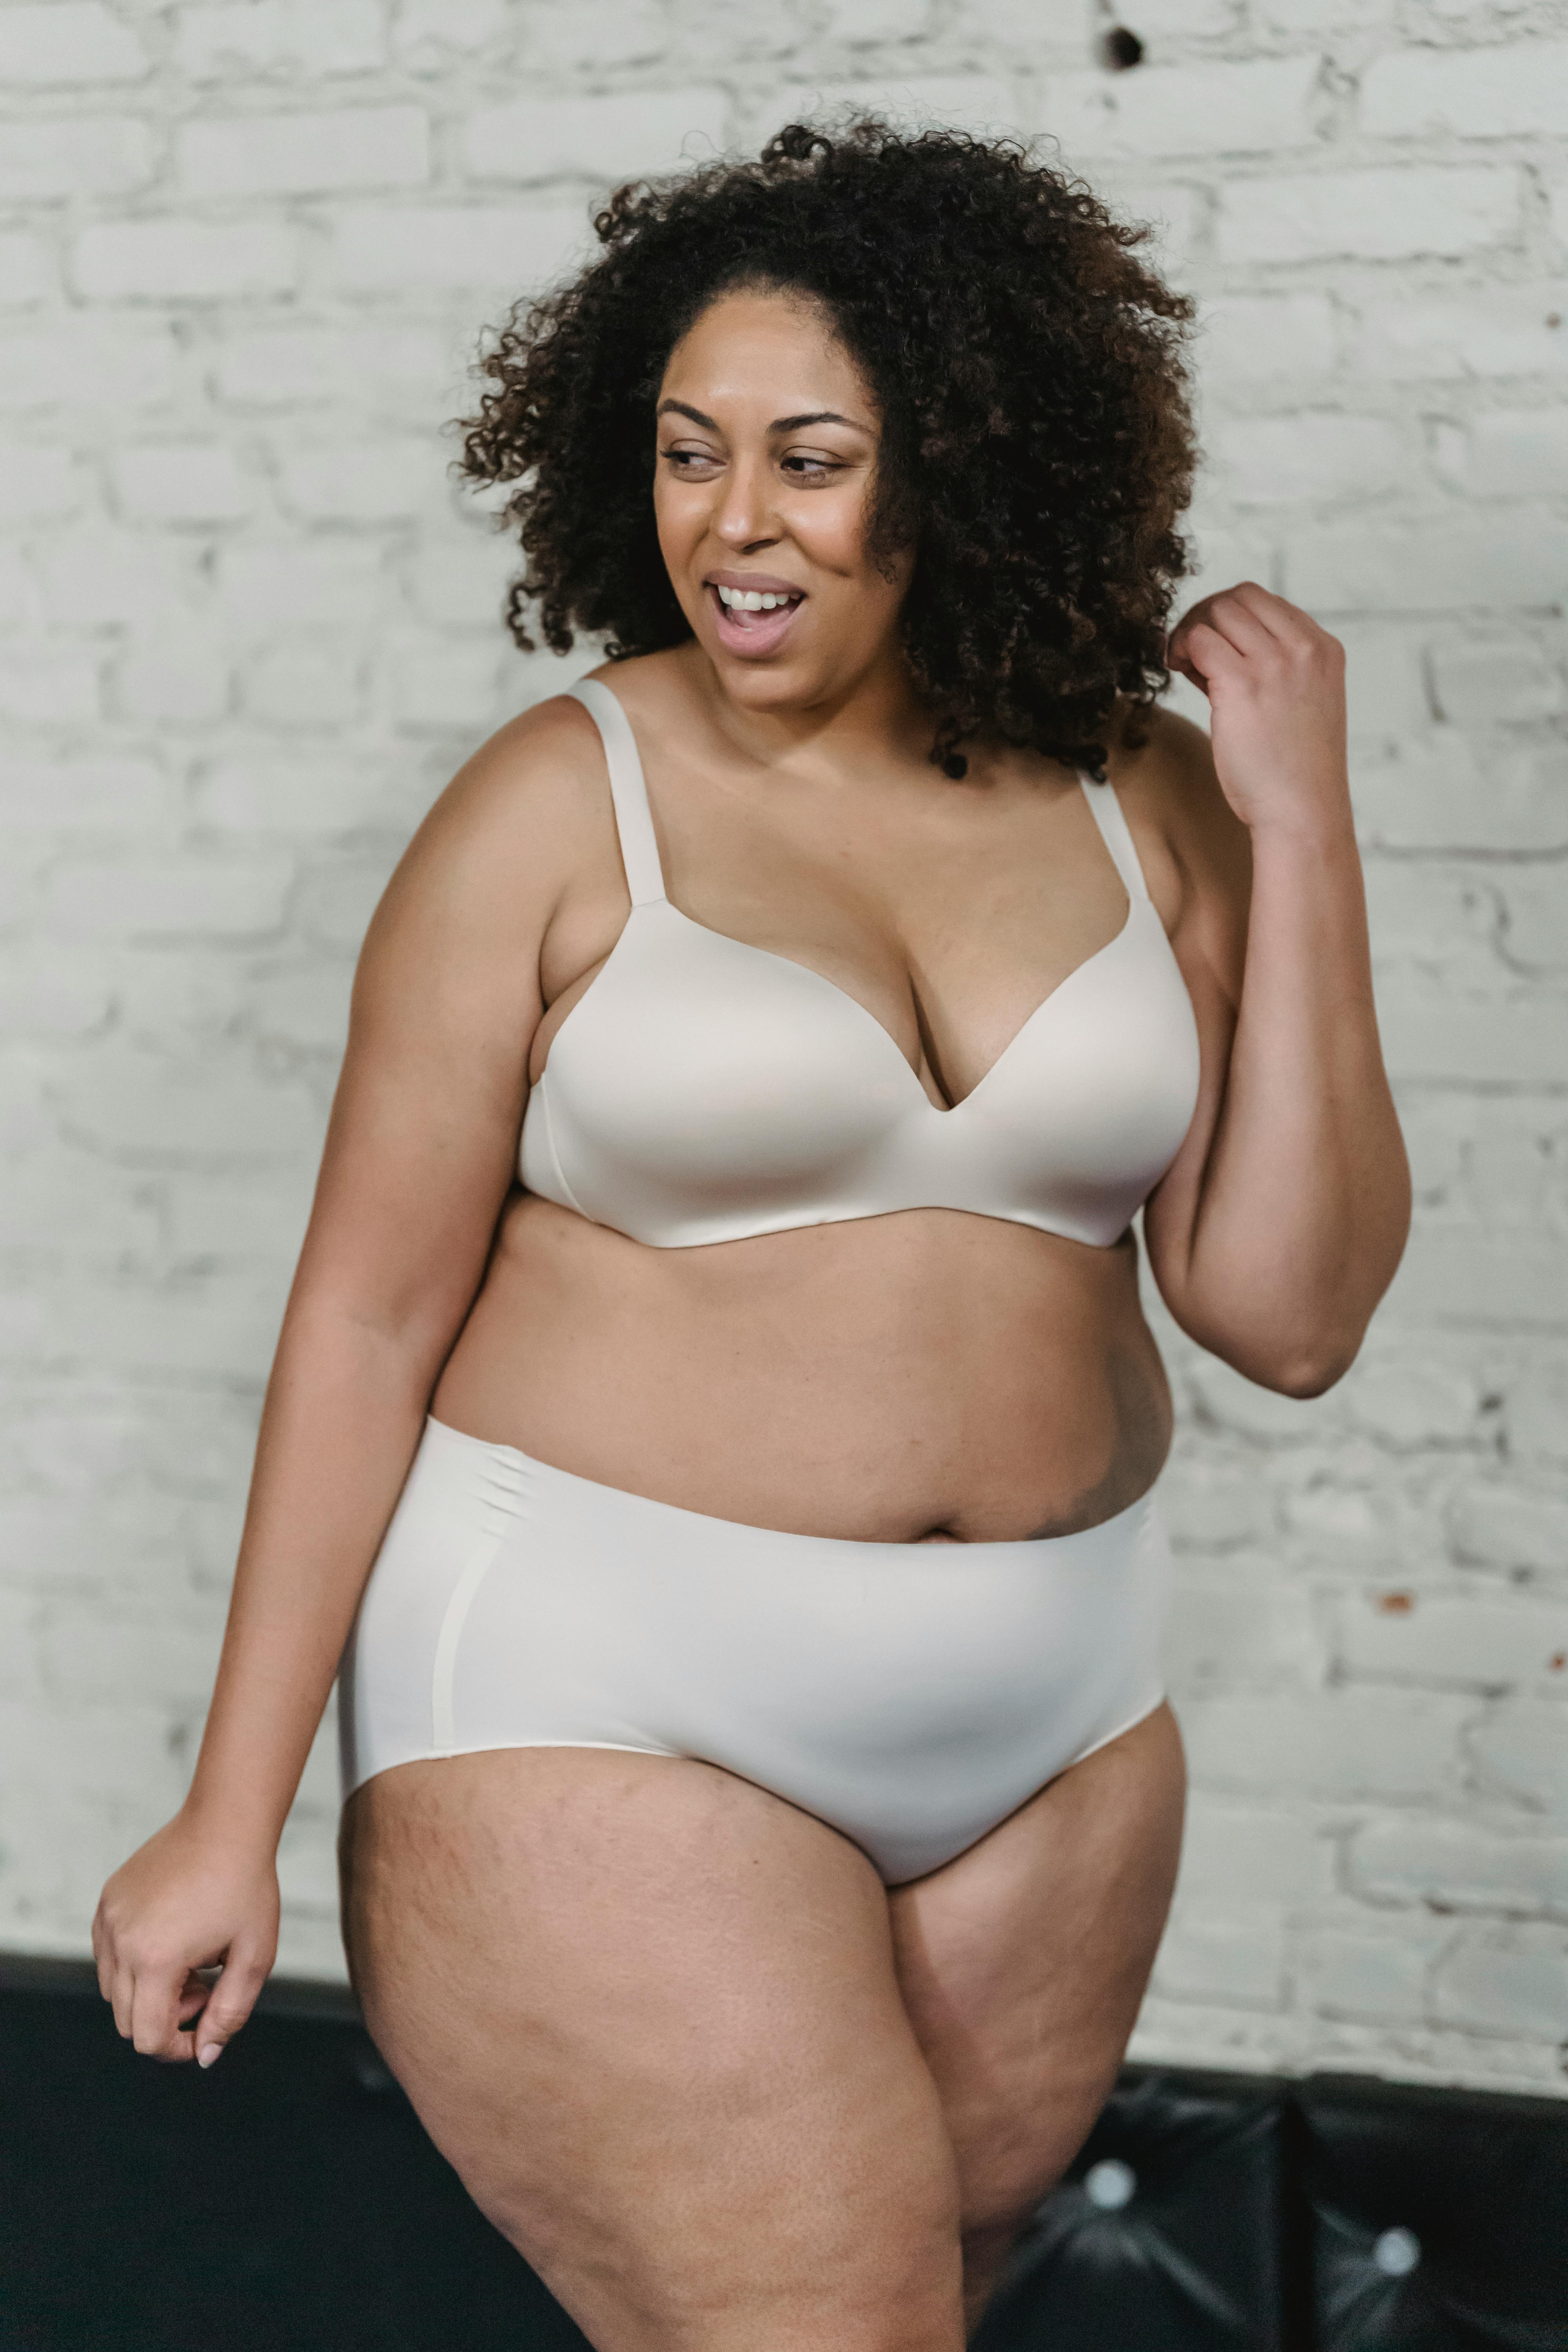 Confident overweight black woman in lingerie · Free Stock Photo